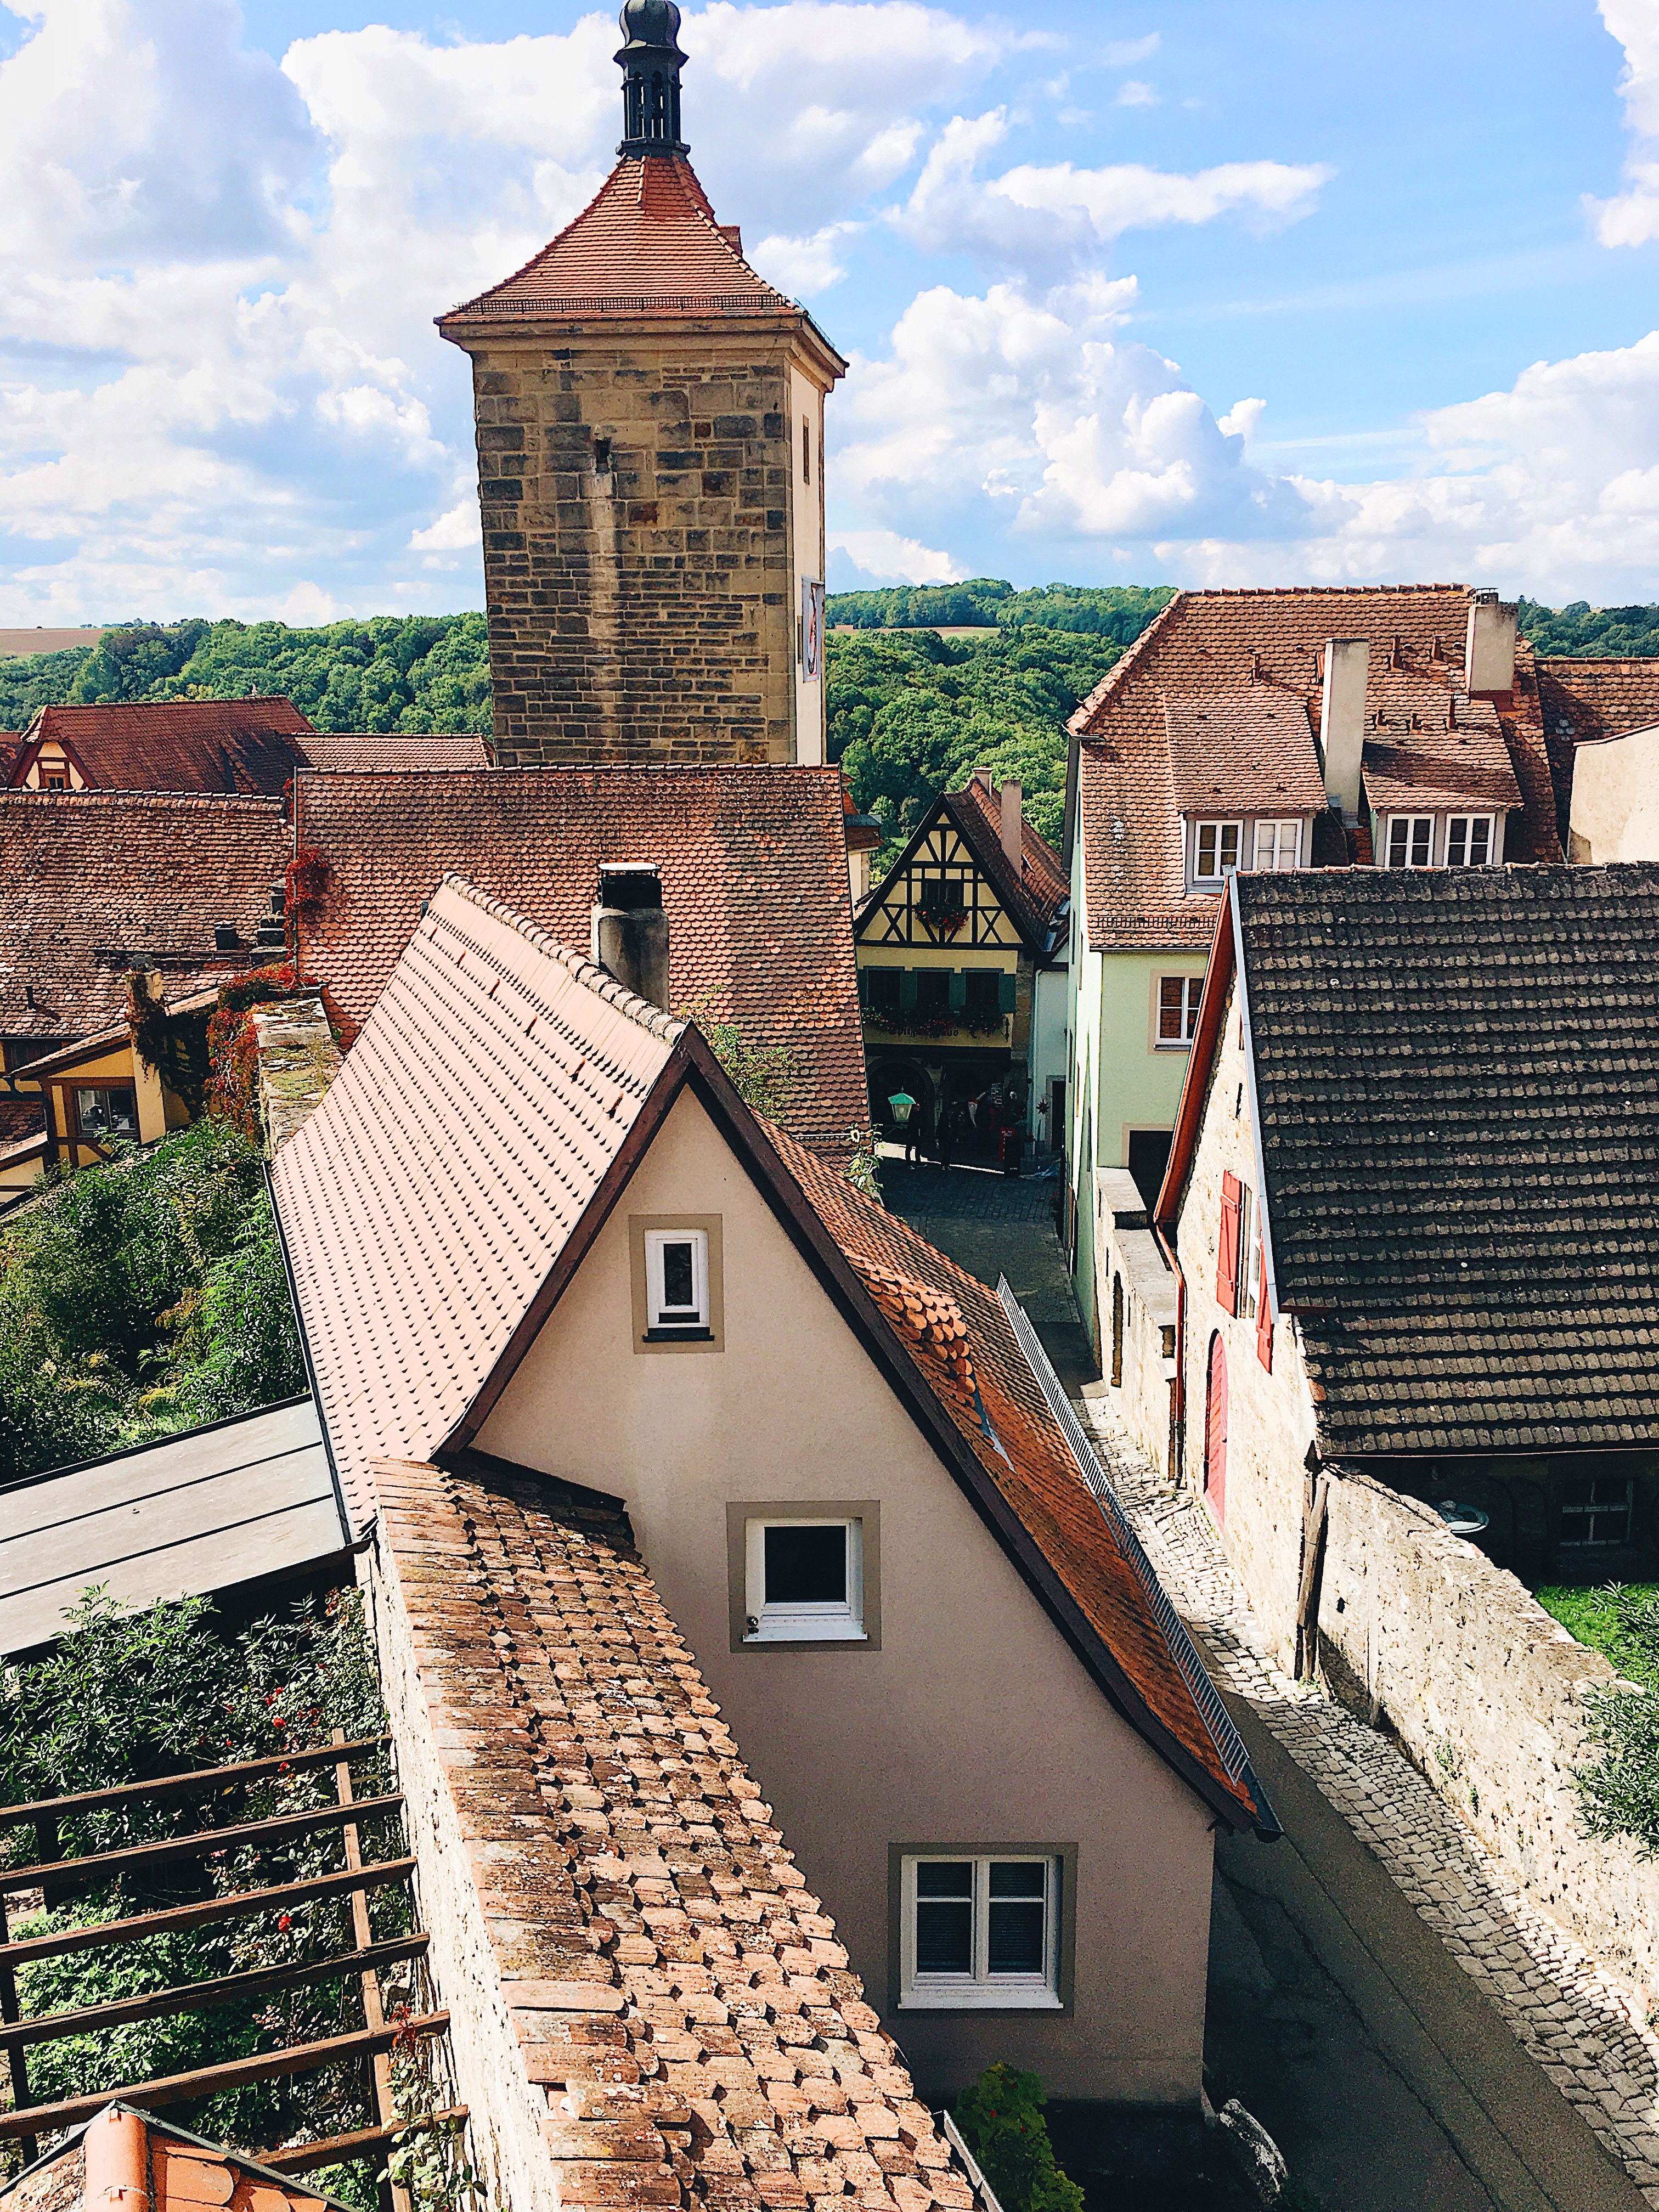 Views from Rothenburg wall